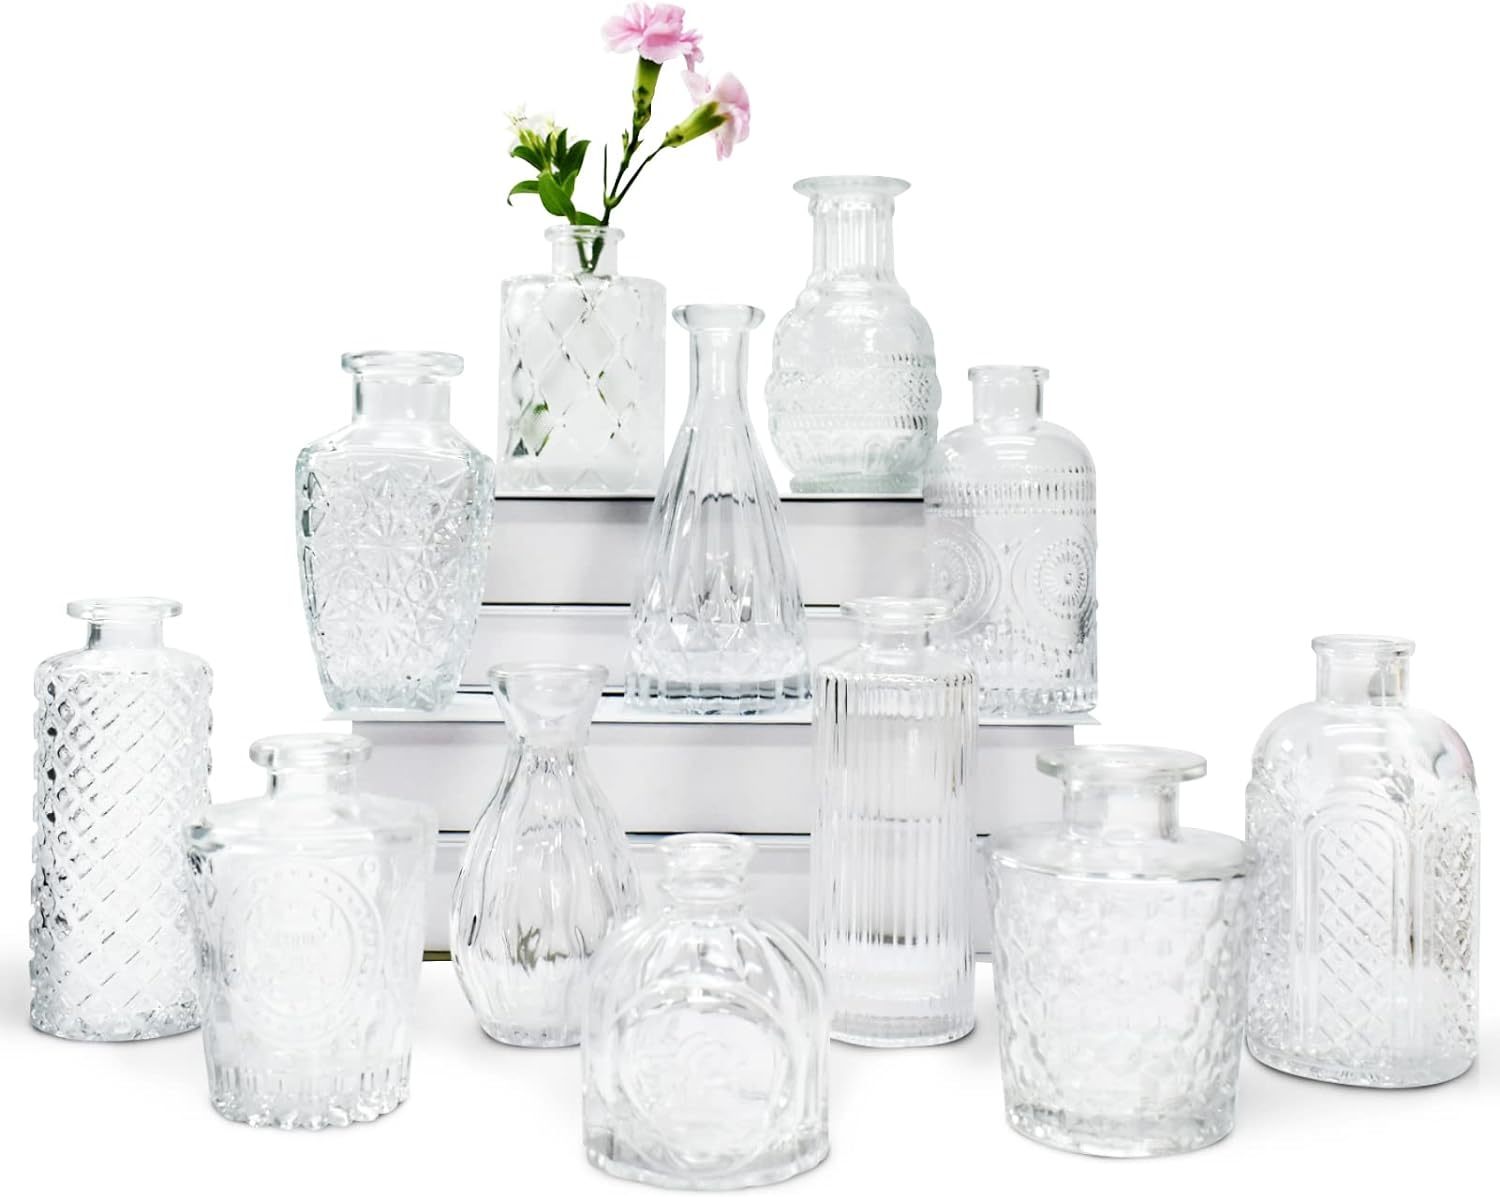 Primary image for Artcome 12Pcs. Small Glass Bud Vase For Home Wedding Table Decorations, Vintage